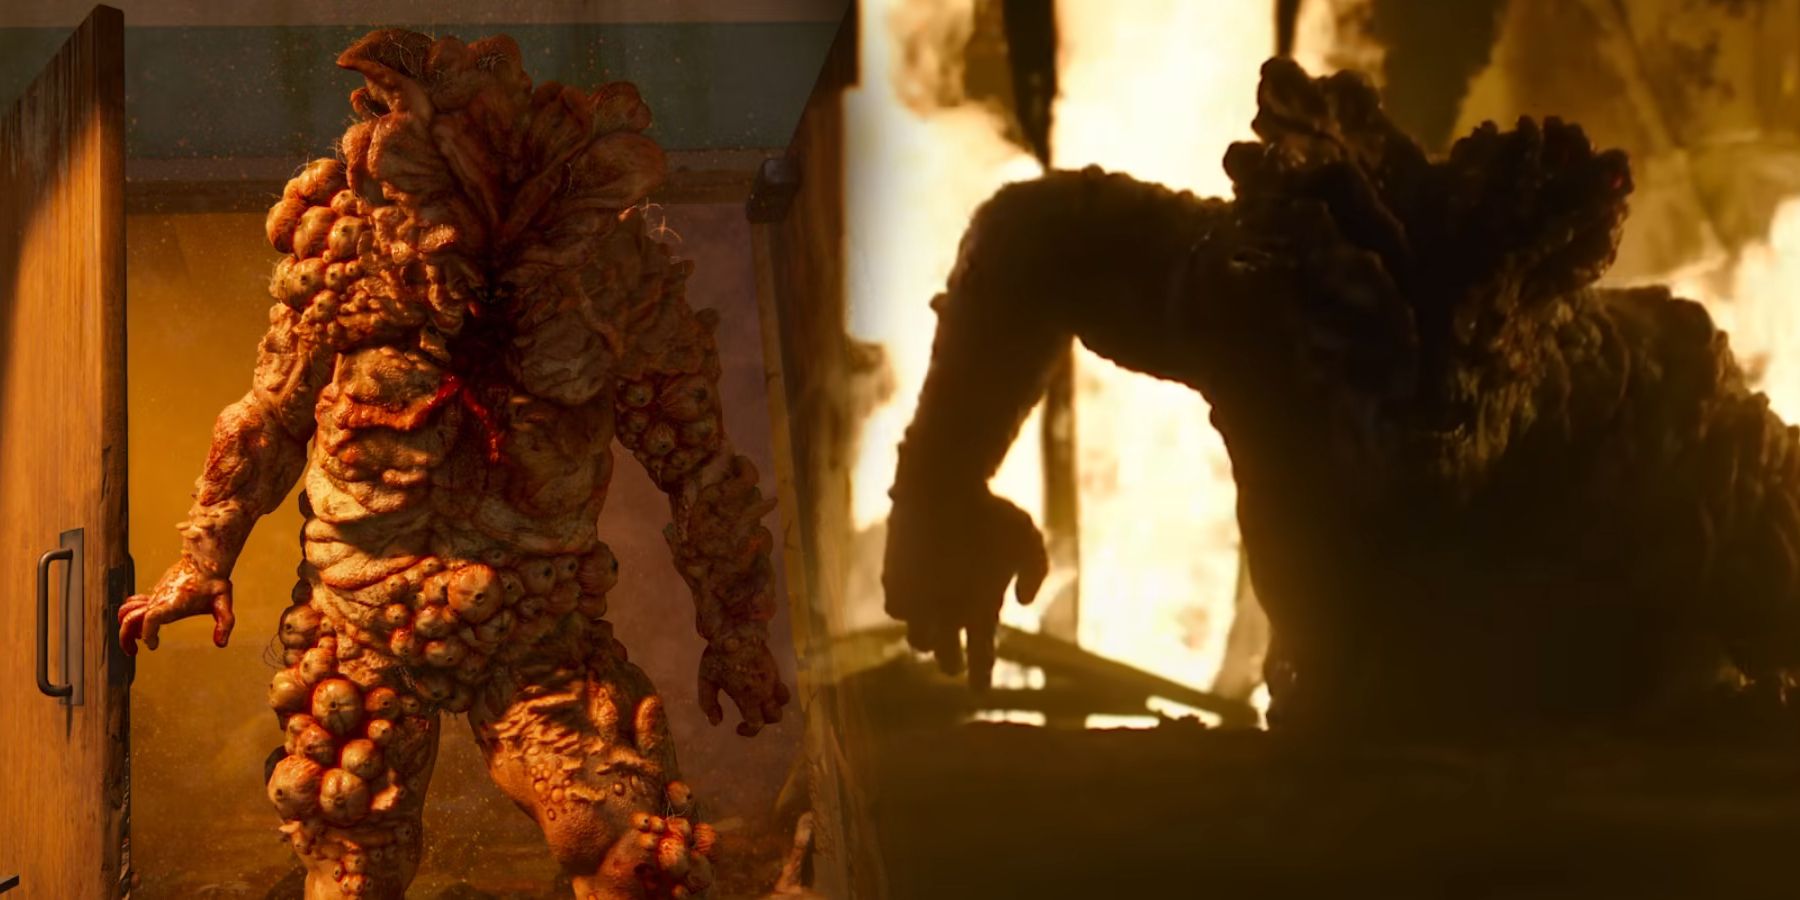 The Last of Us' game Bloater compared to the show's Bloater